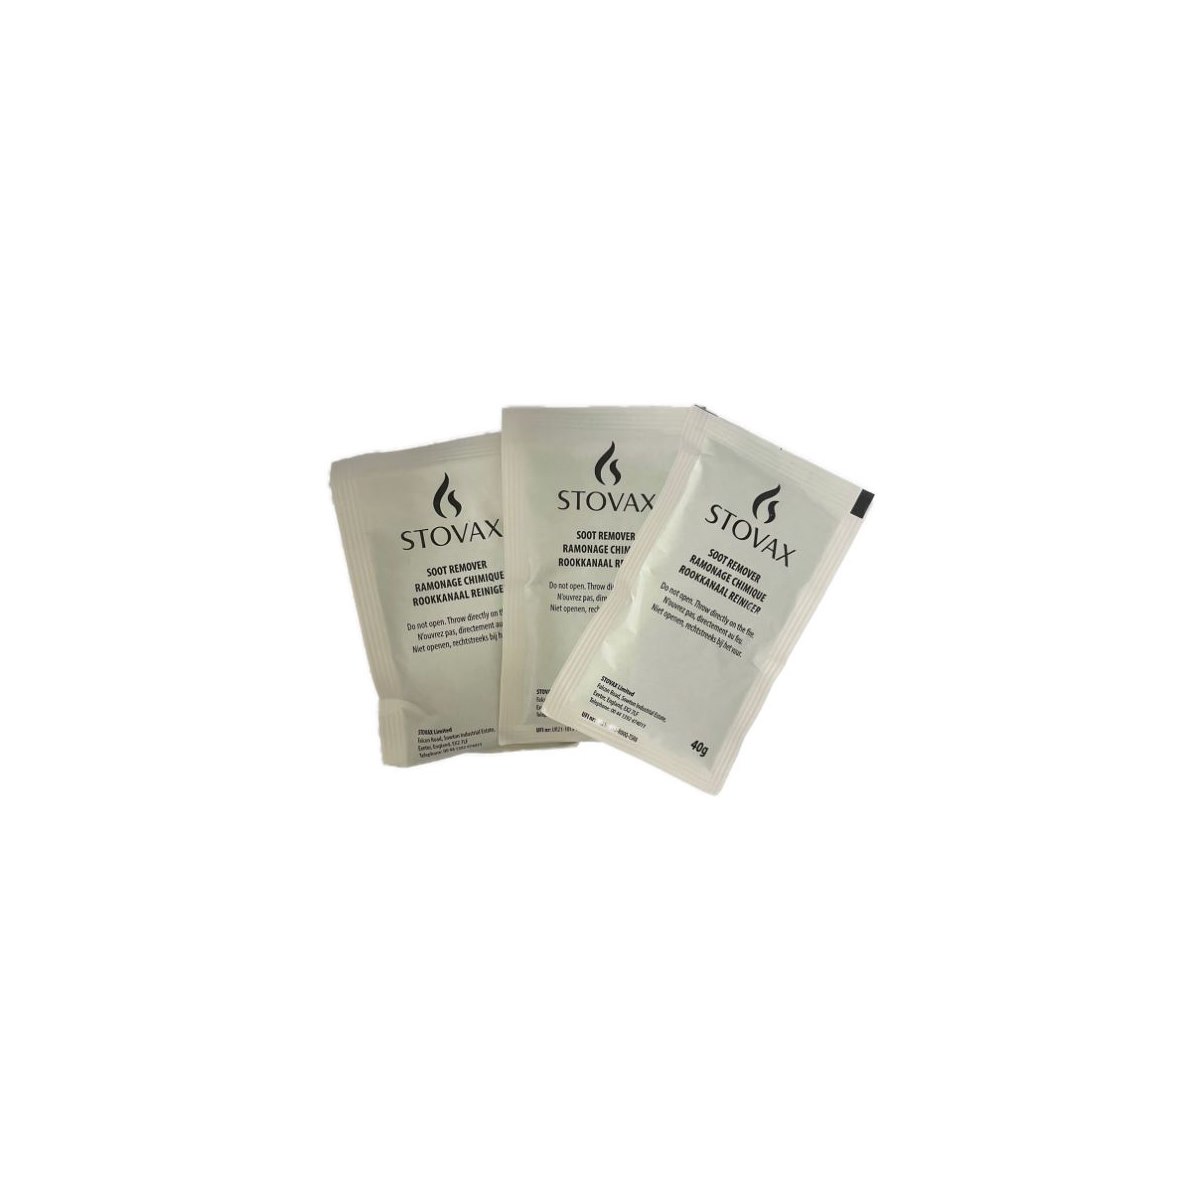 Stovax Protector Flue and Chimney Cleaner Sachets